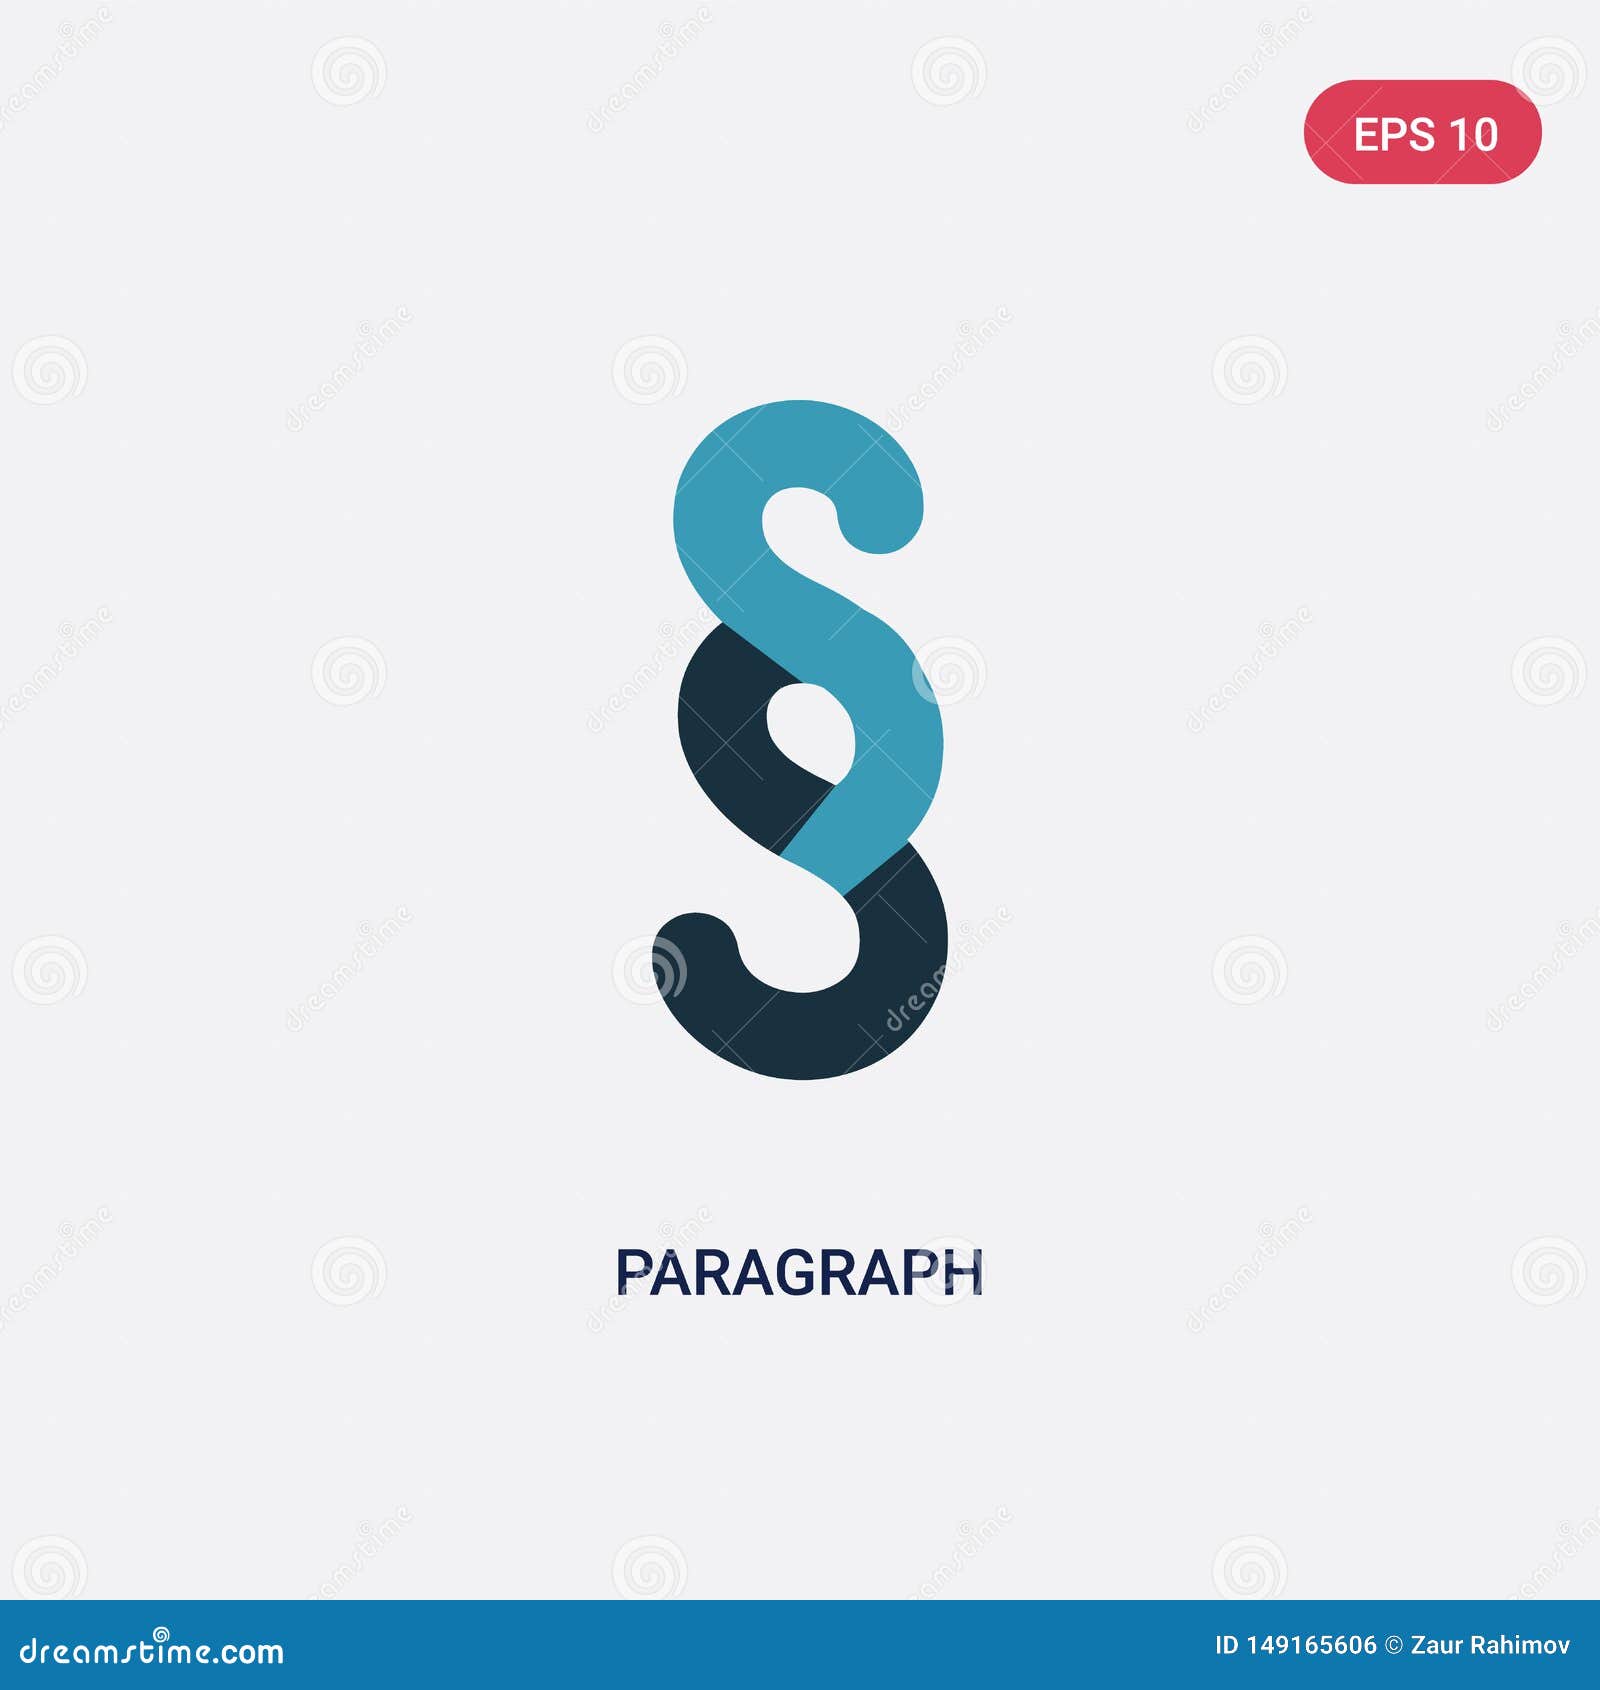 Two Color Paragraph Vector Icon from Shapes Concept. Isolated Blue